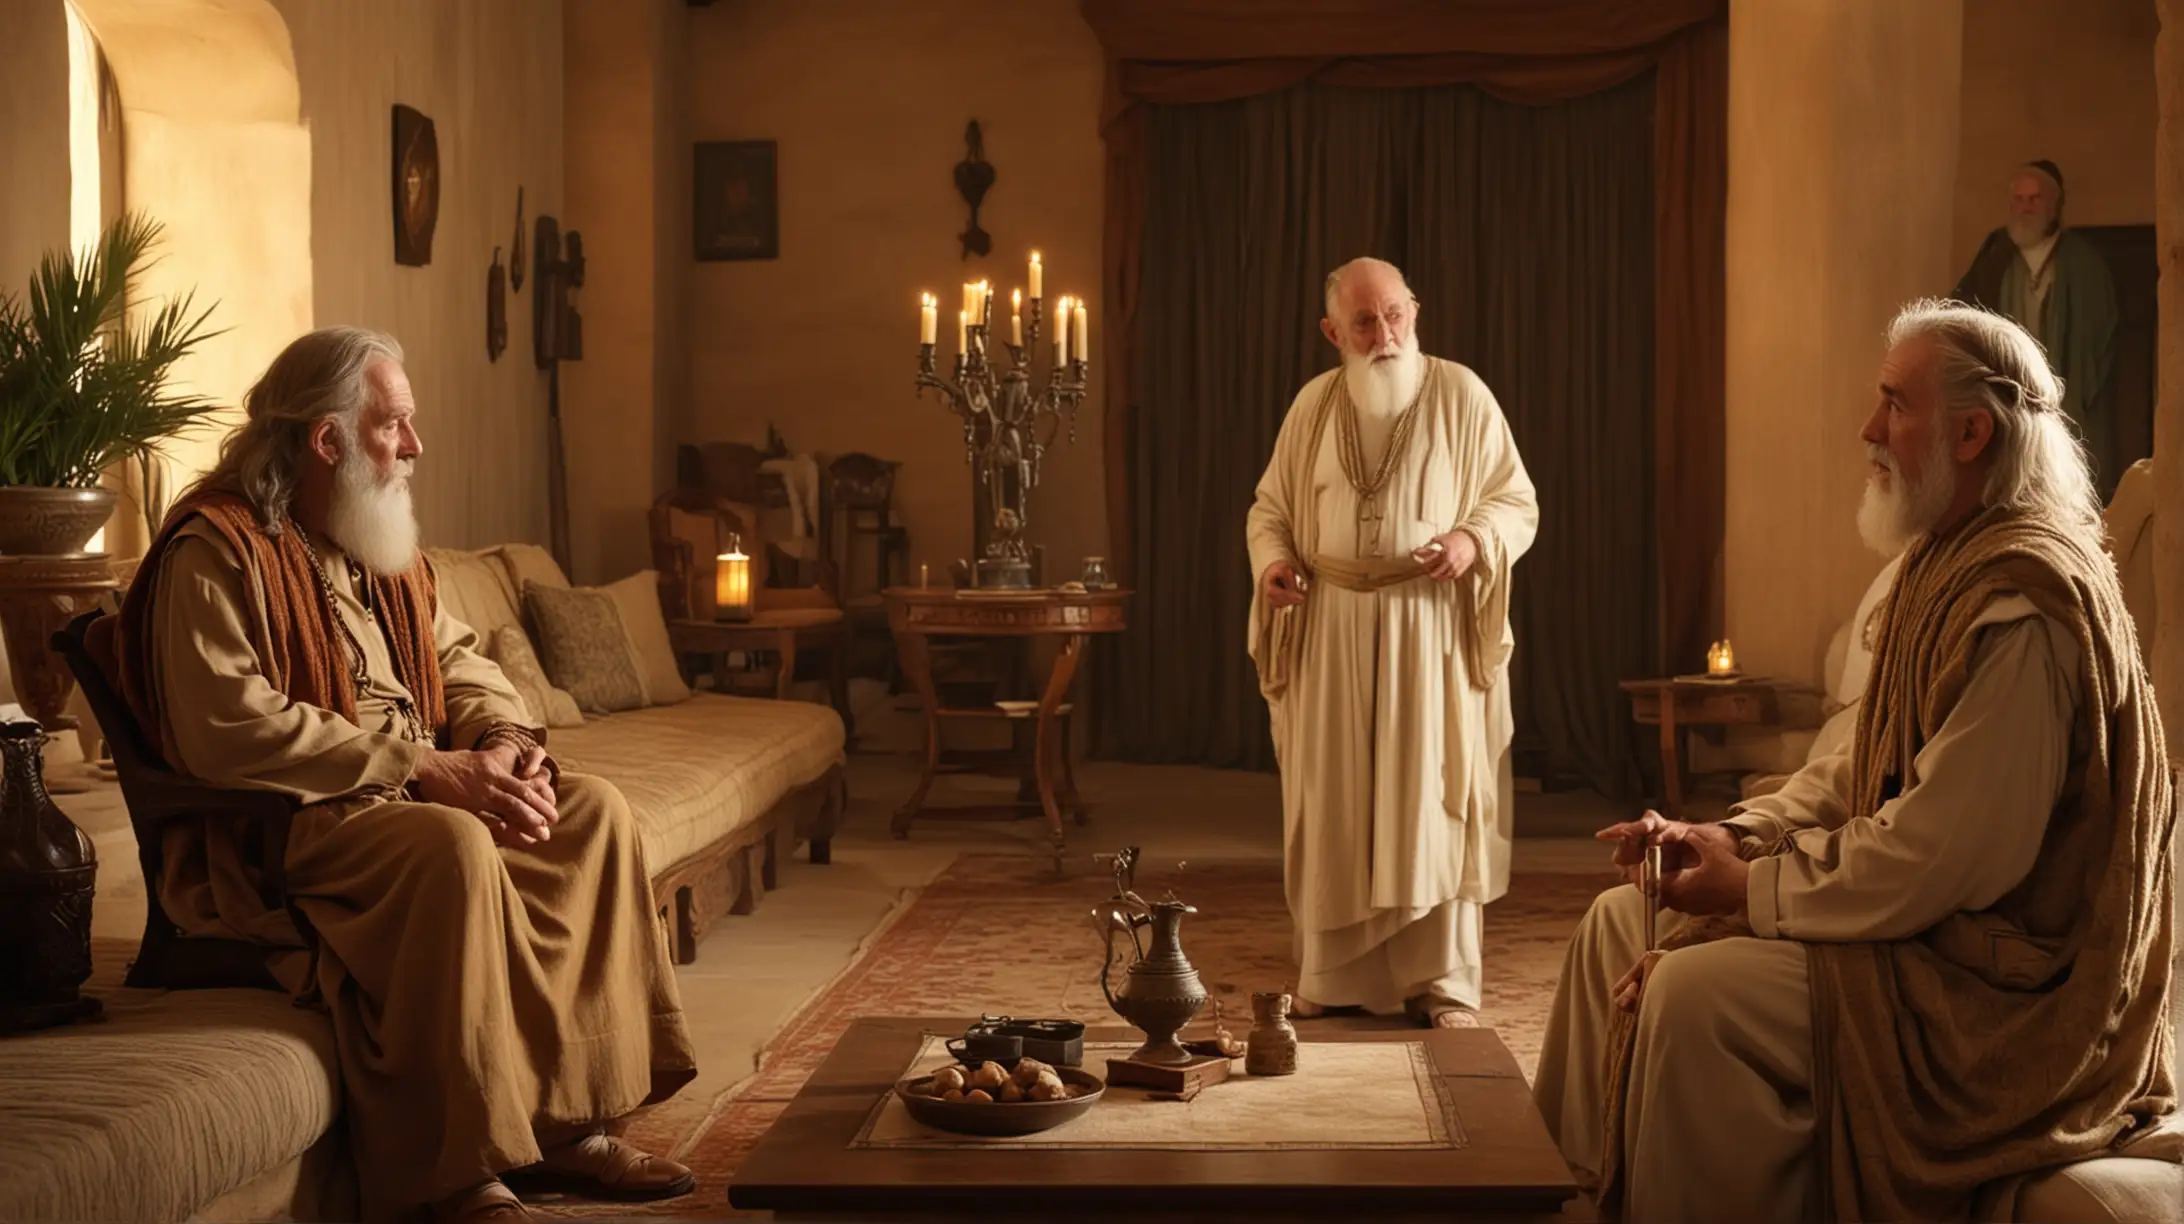 2 old men, talking to an attractive middle aged woman in a luxurious desert room. During the Biblical era of King David.